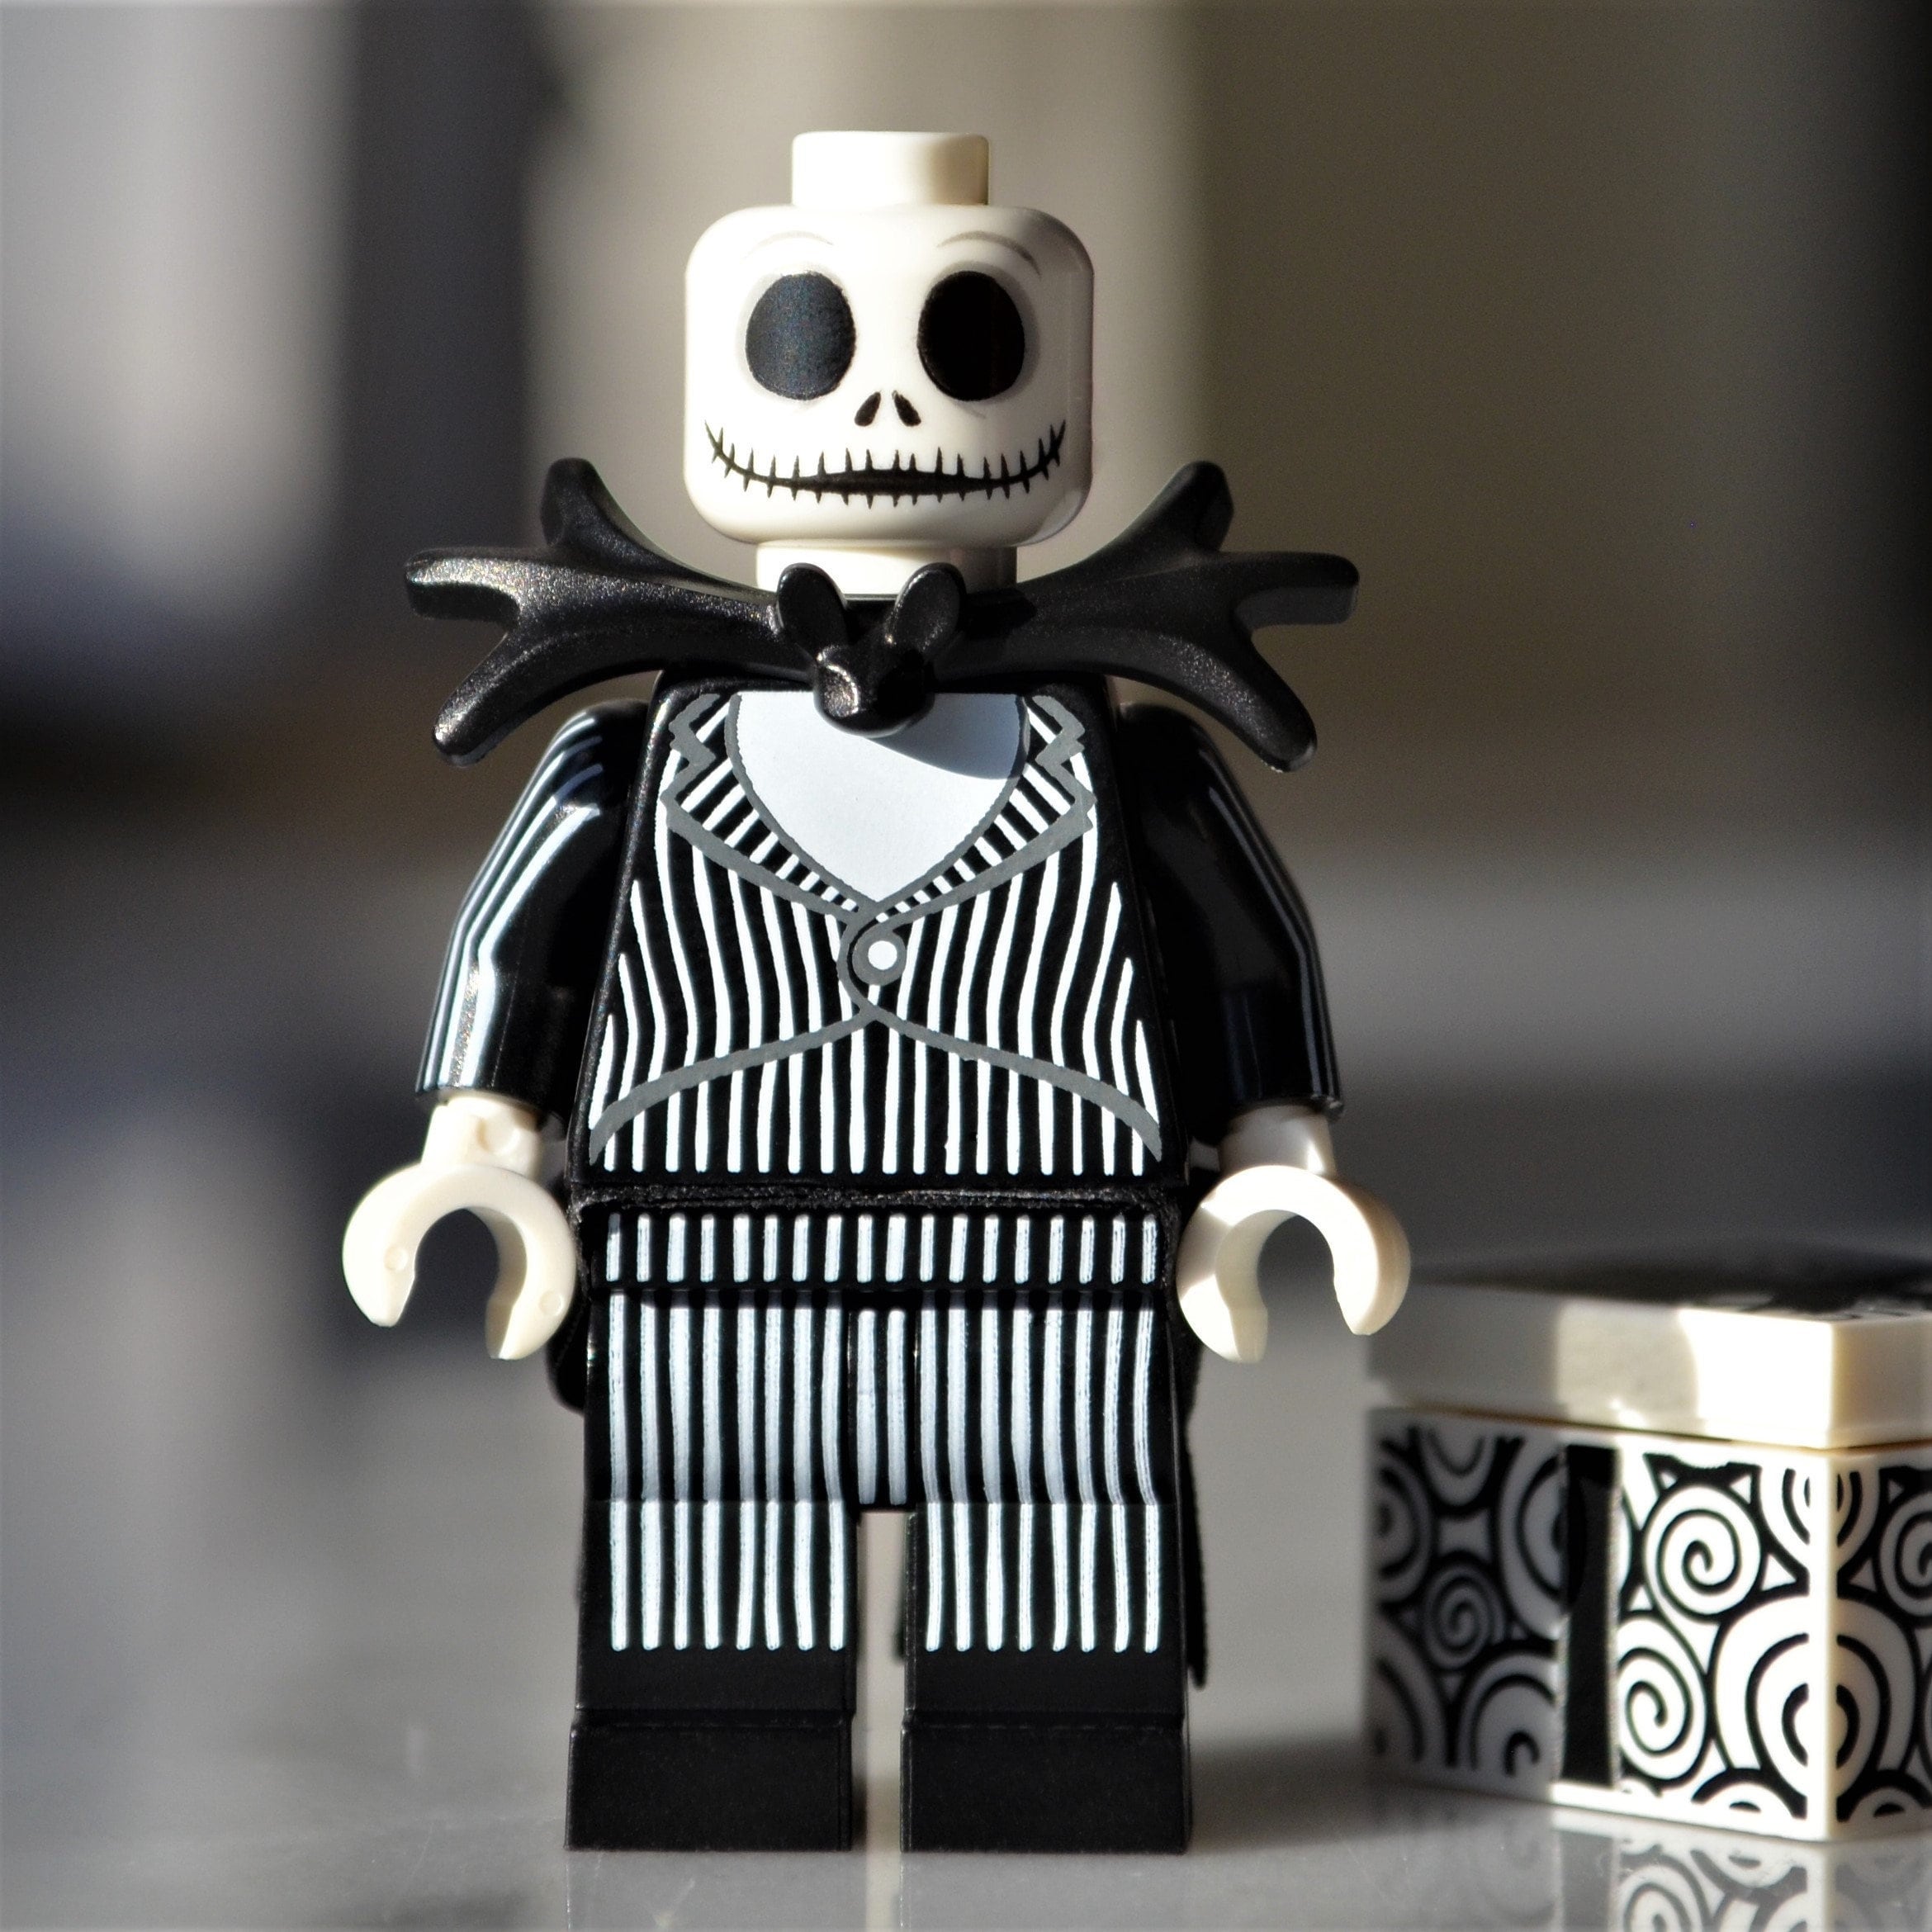 The Nightmare Before Christmas  Lego custom minifigures, Lego projects,  Cool lego